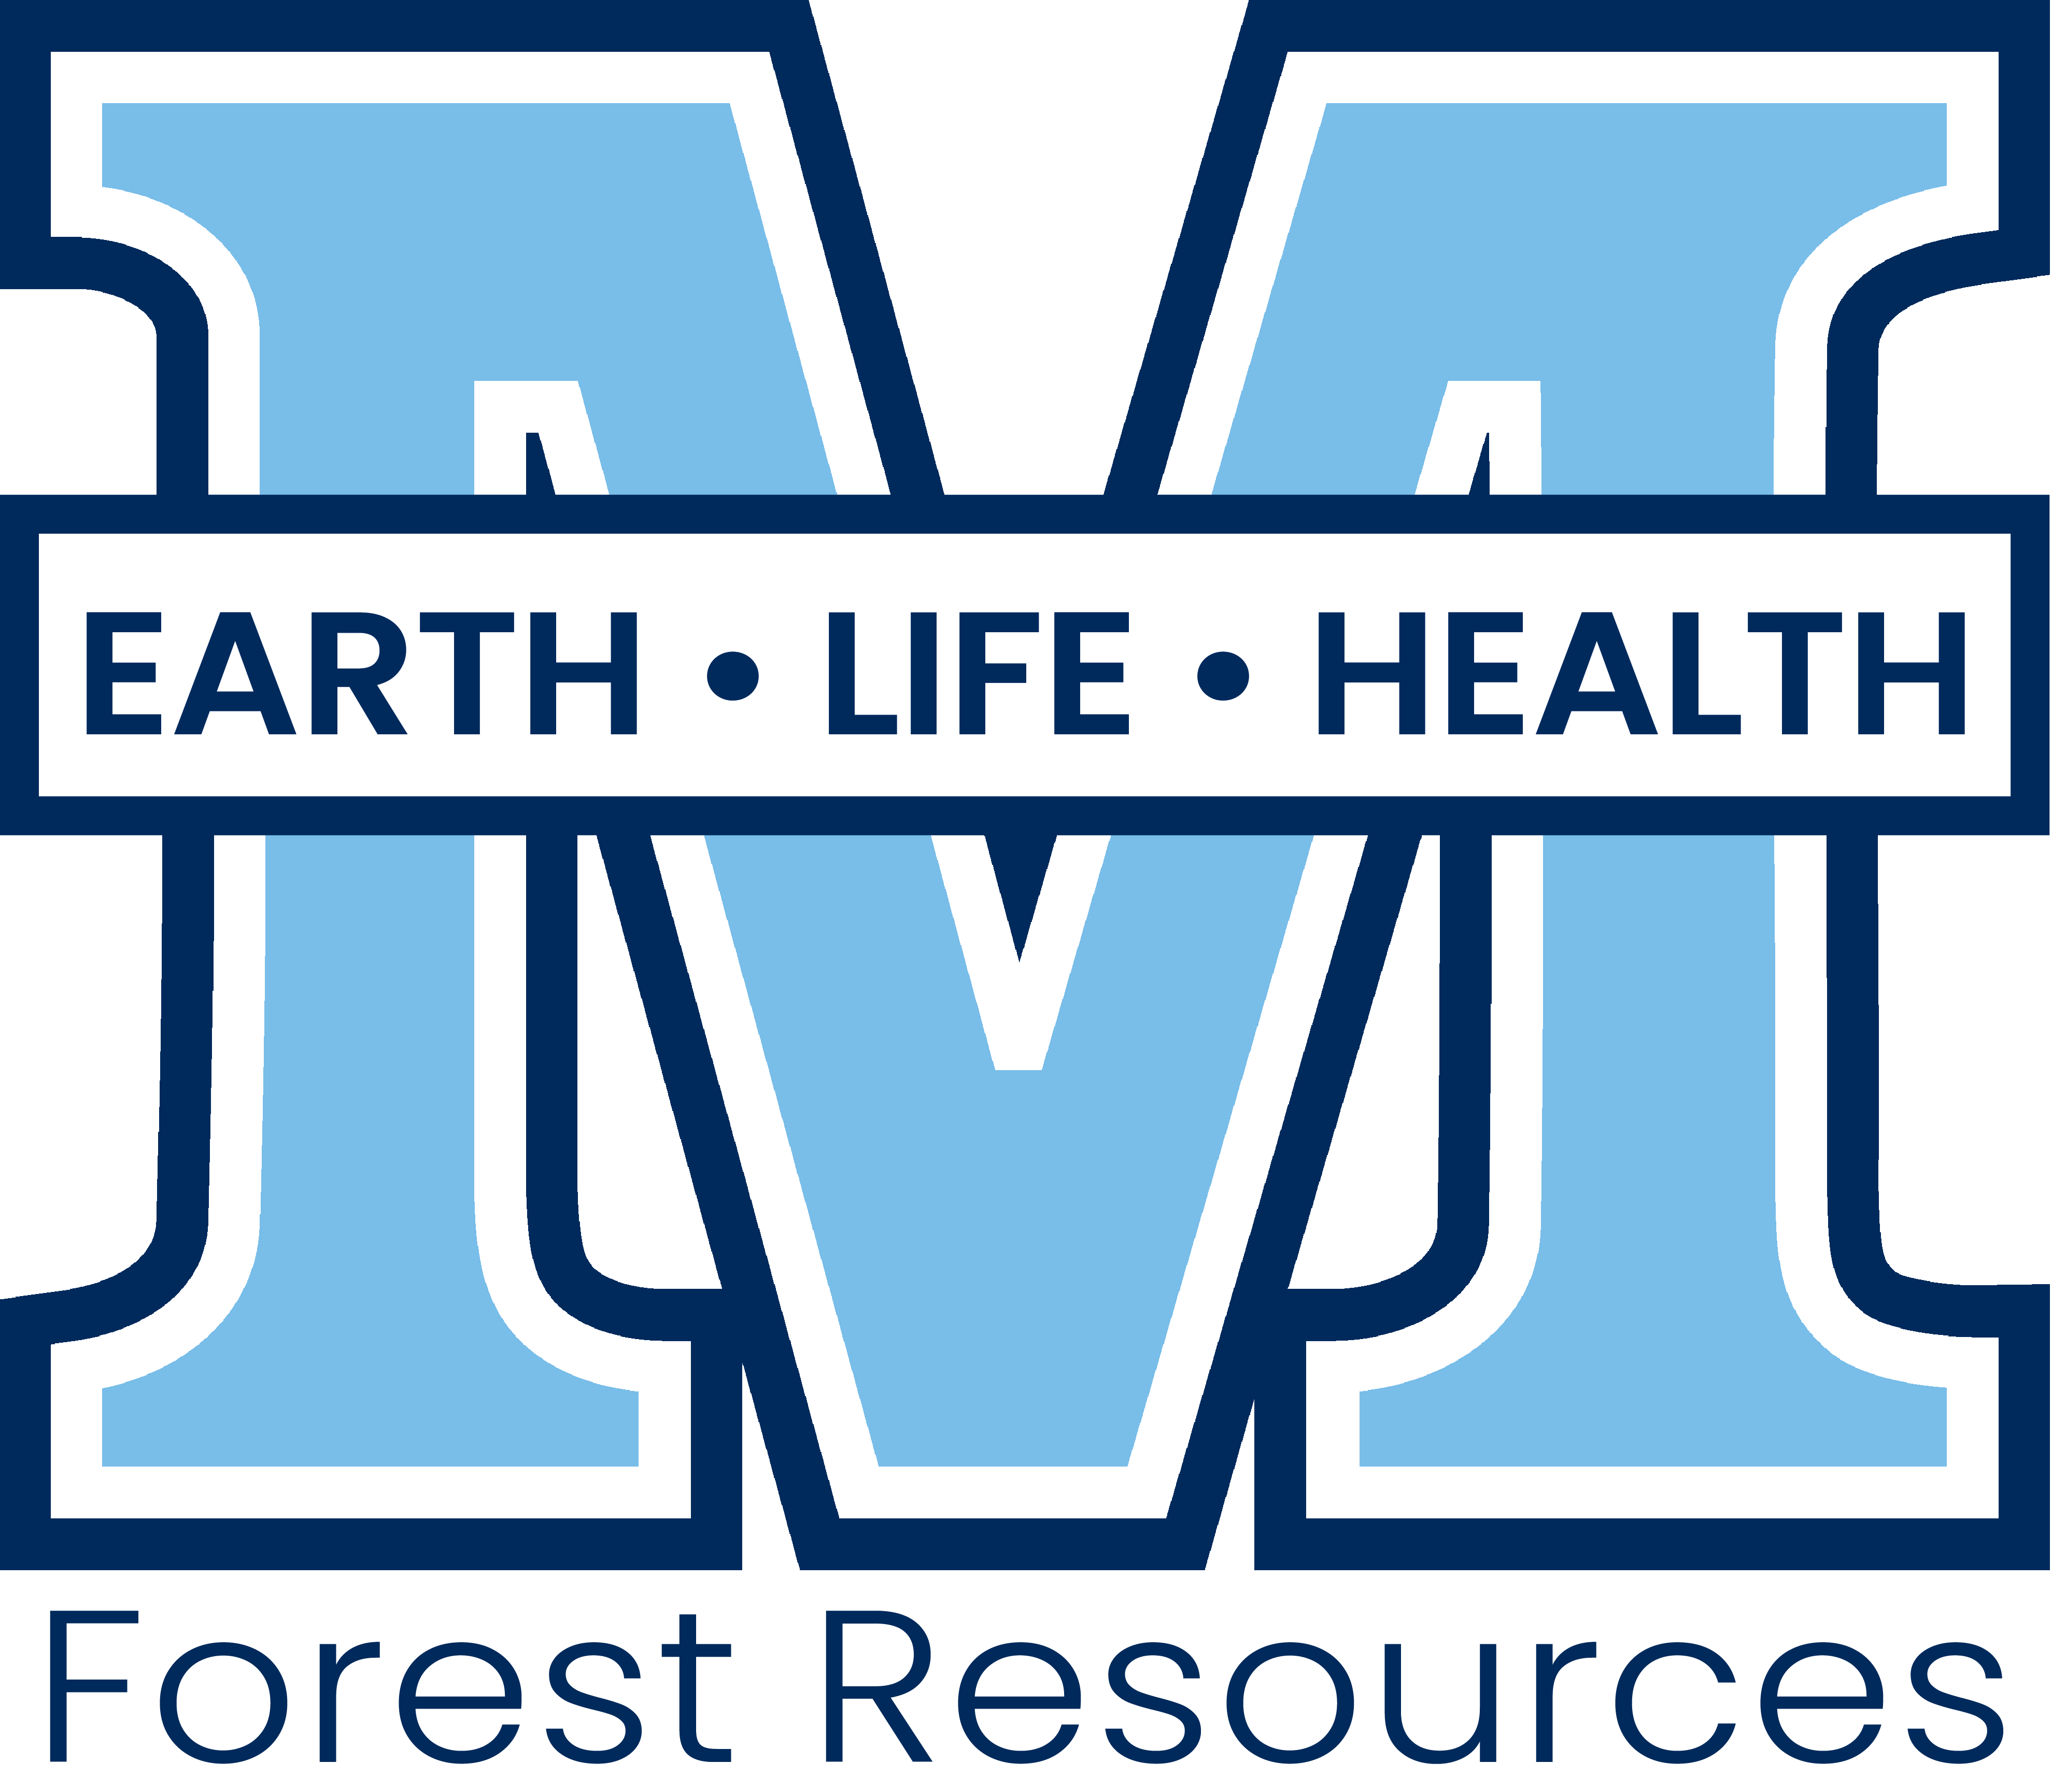 College M logo with forest resources